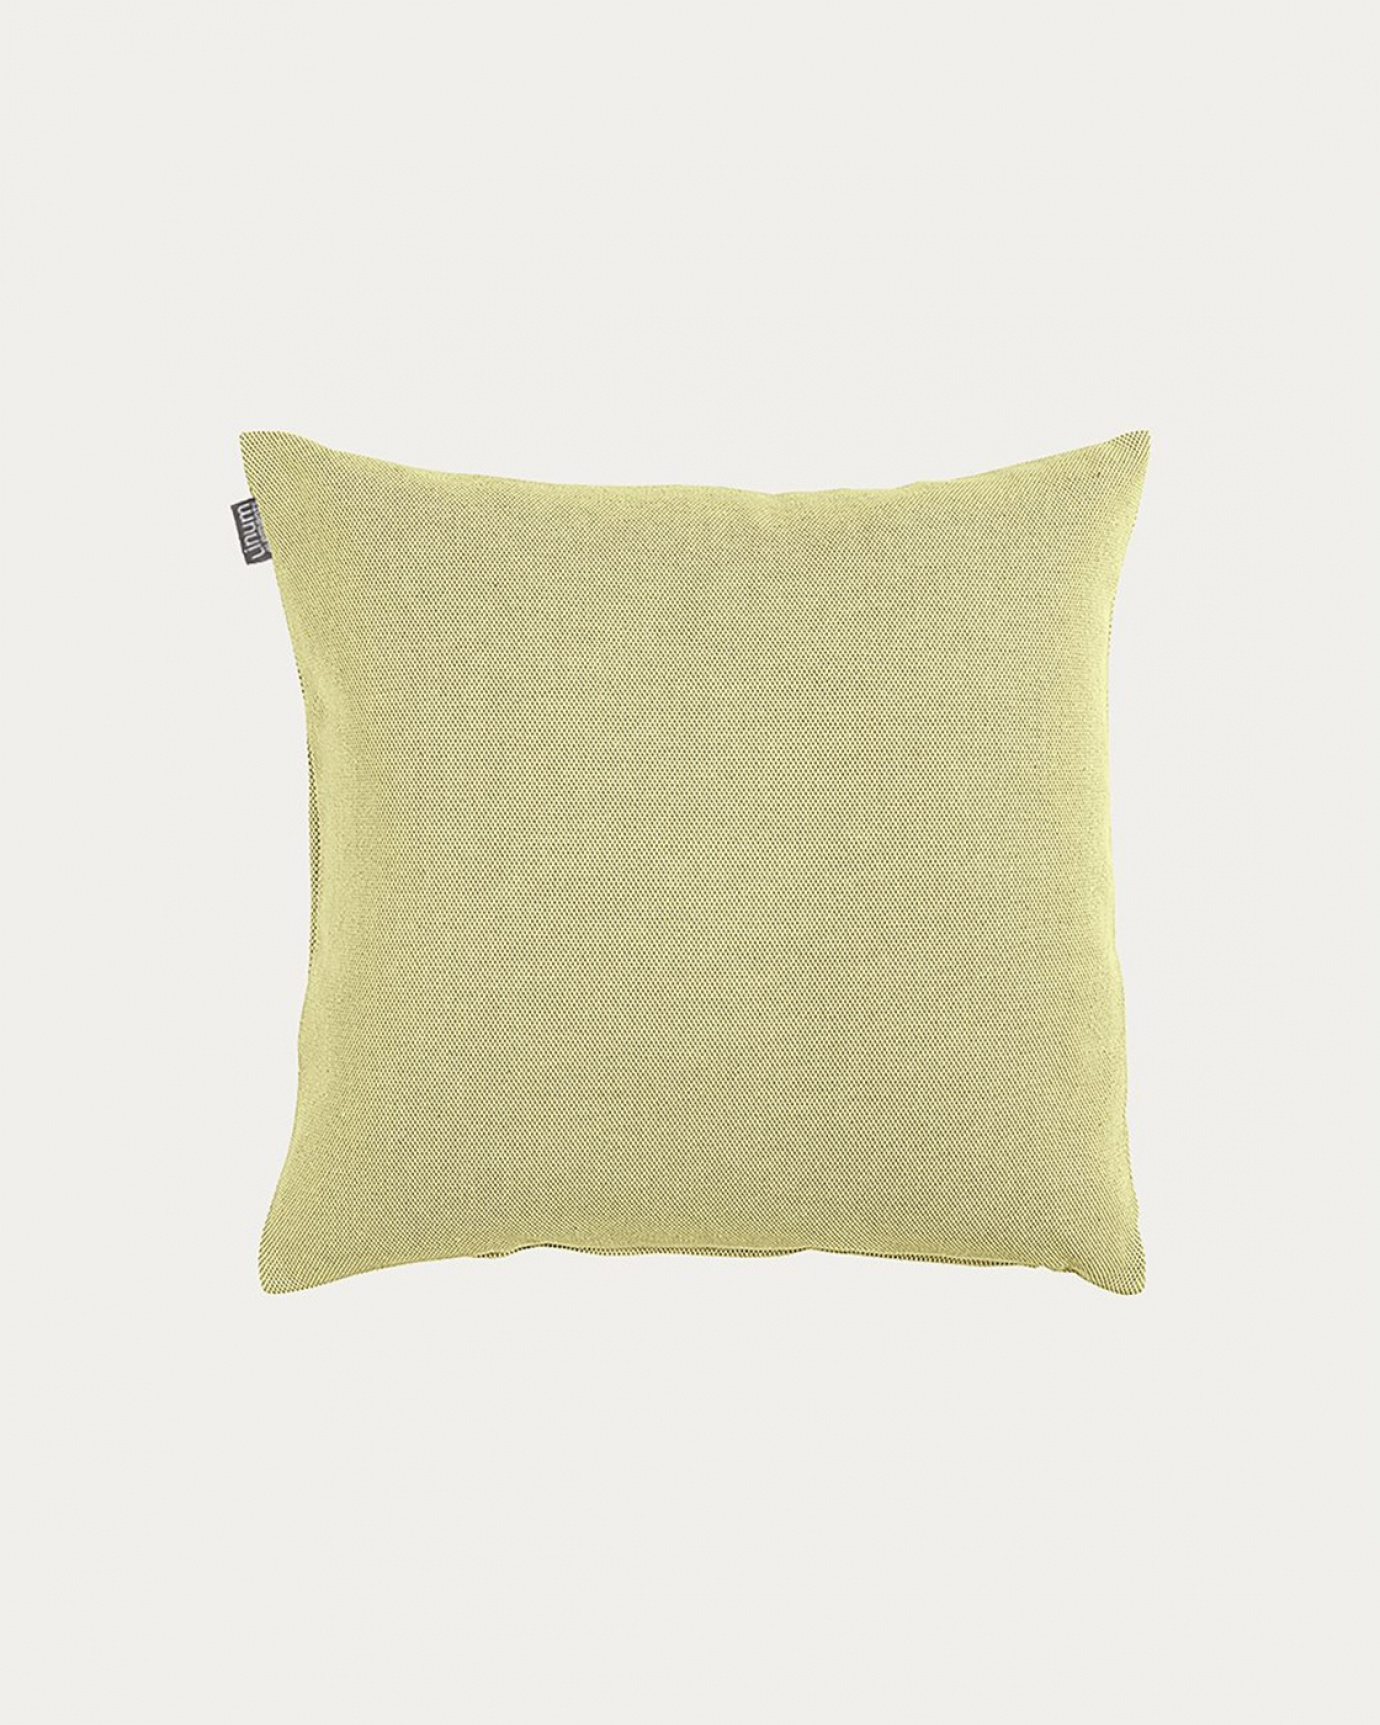 Product image light green PEPPER cushion cover made of soft cotton from LINUM DESIGN. Easy to wash and durable for generations. Size 40x40 cm.